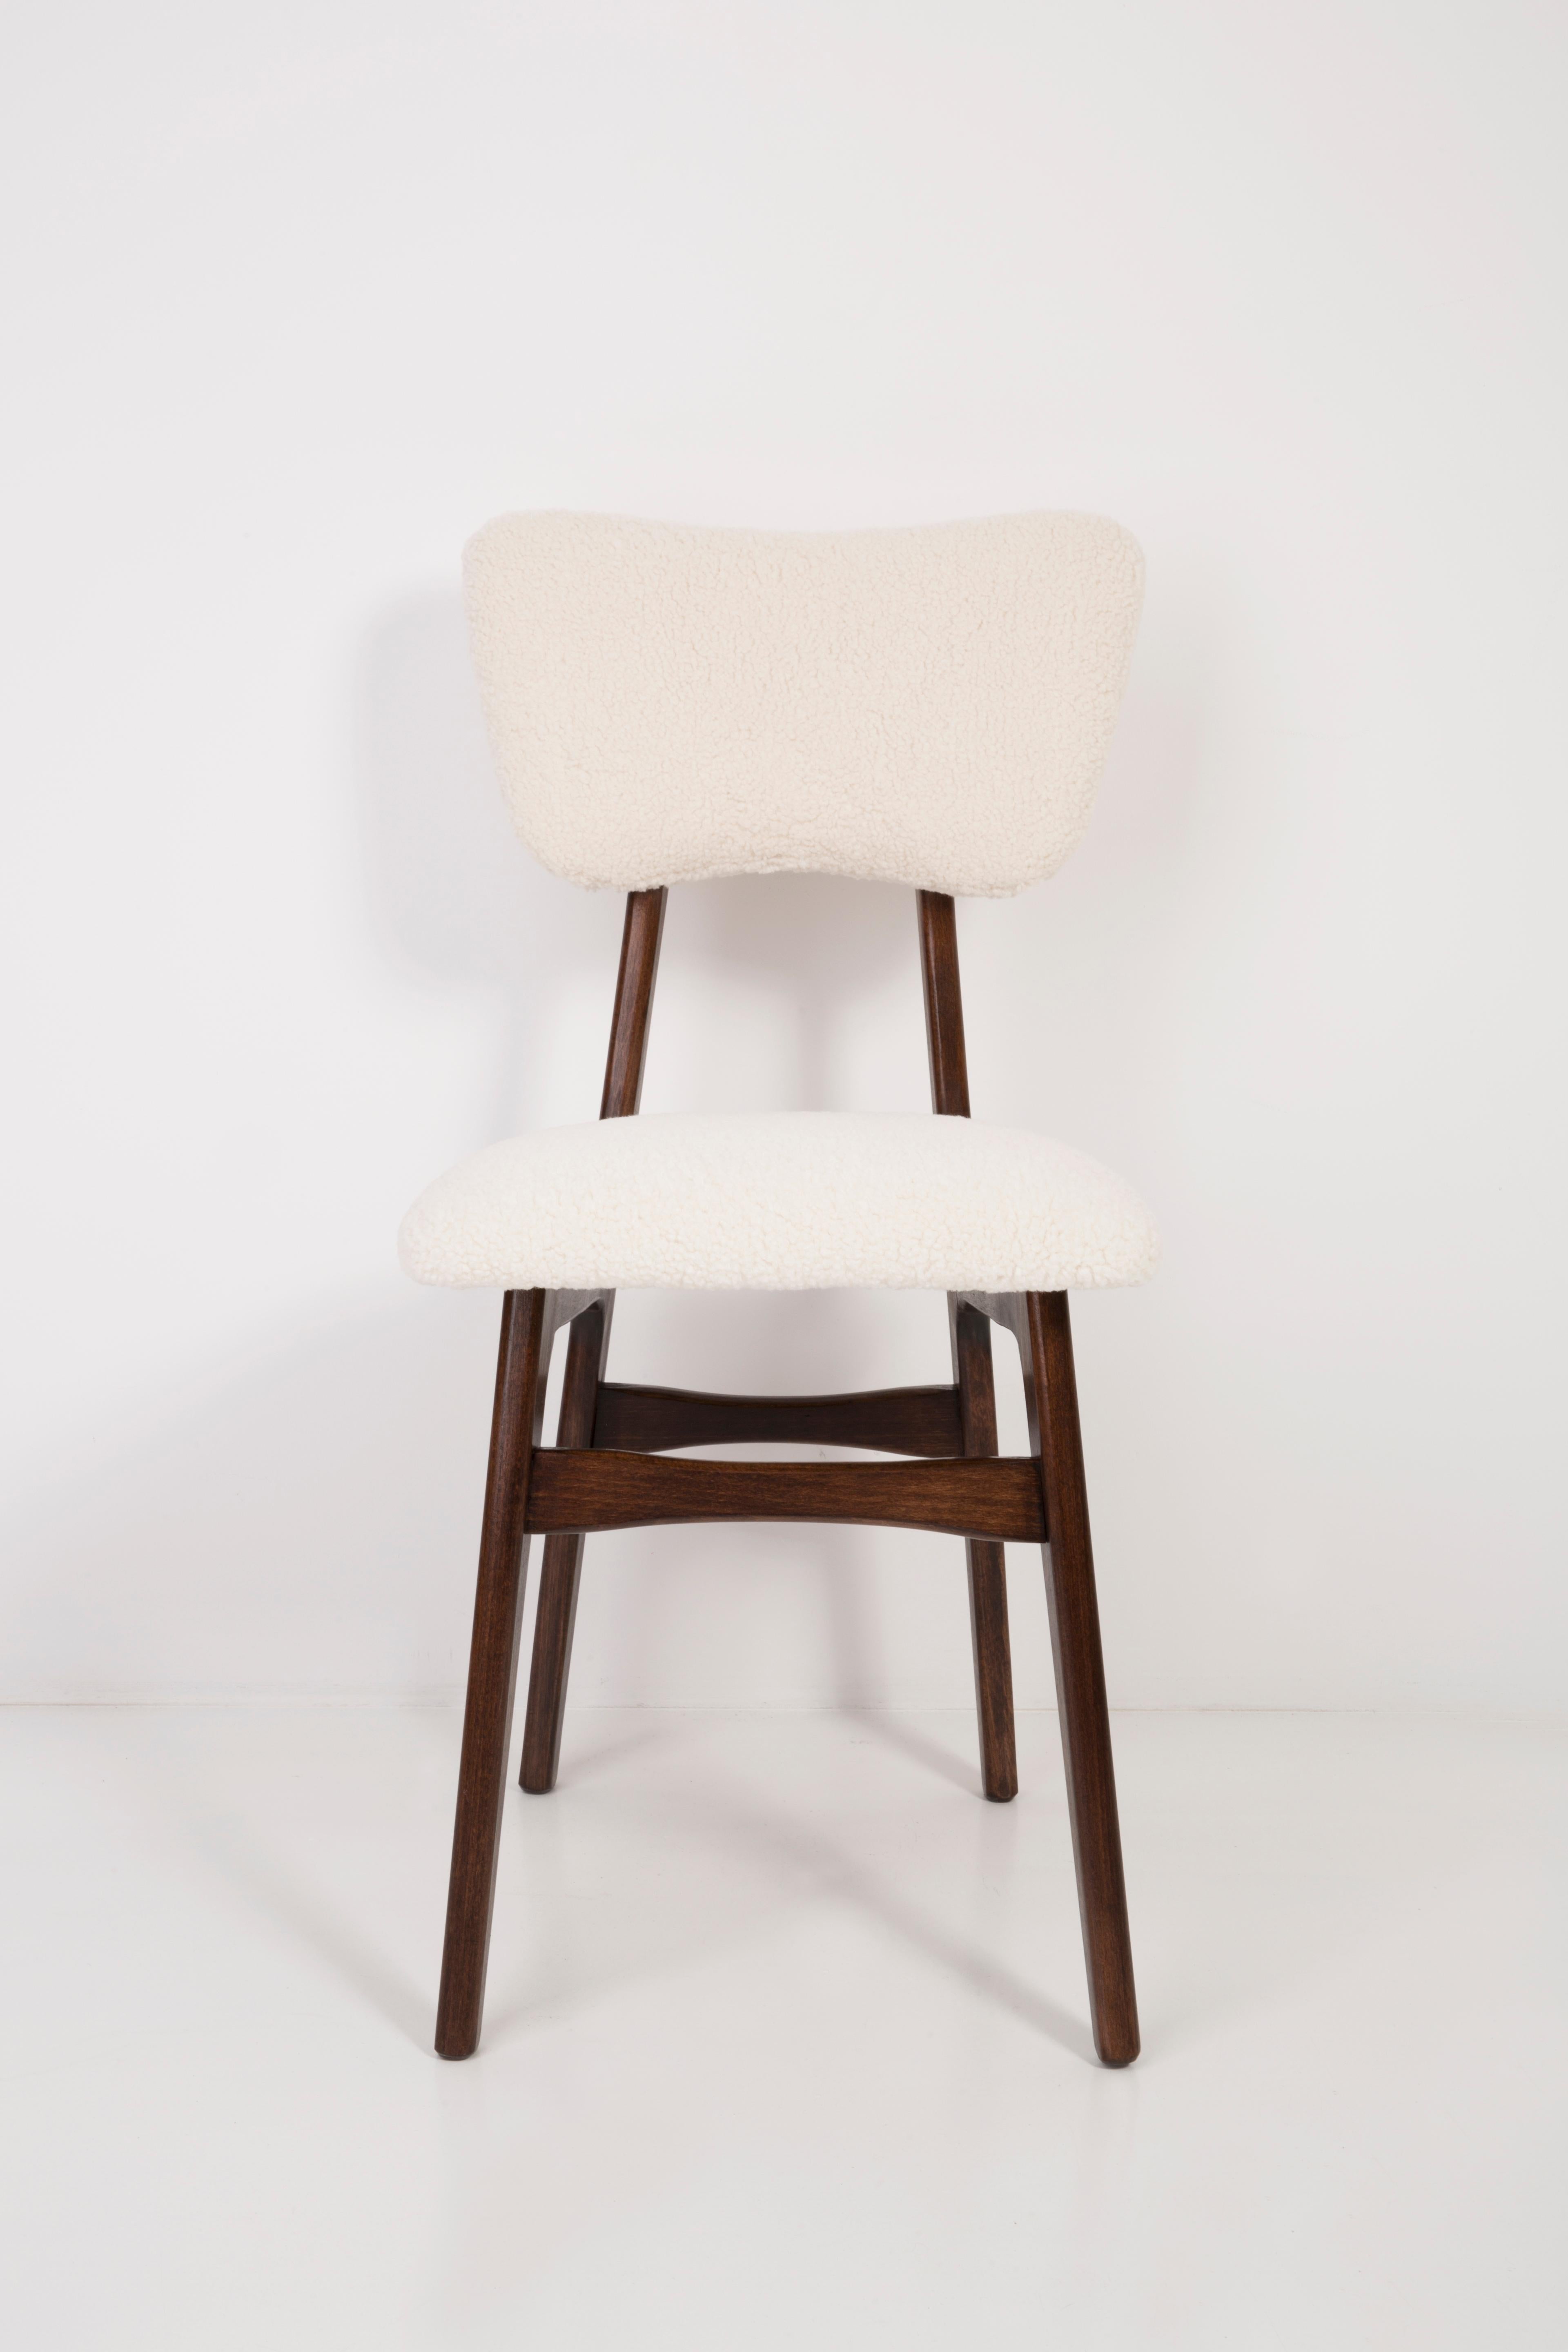 Chair designed by Prof. Rajmund Halas. Made of beechwood. Chair is after a complete upholstery renovation; the woodwork has been refreshed. Seat and back is dressed in crème, durable and pleasant to the touch bouclé fabric. Chair is stabile and very